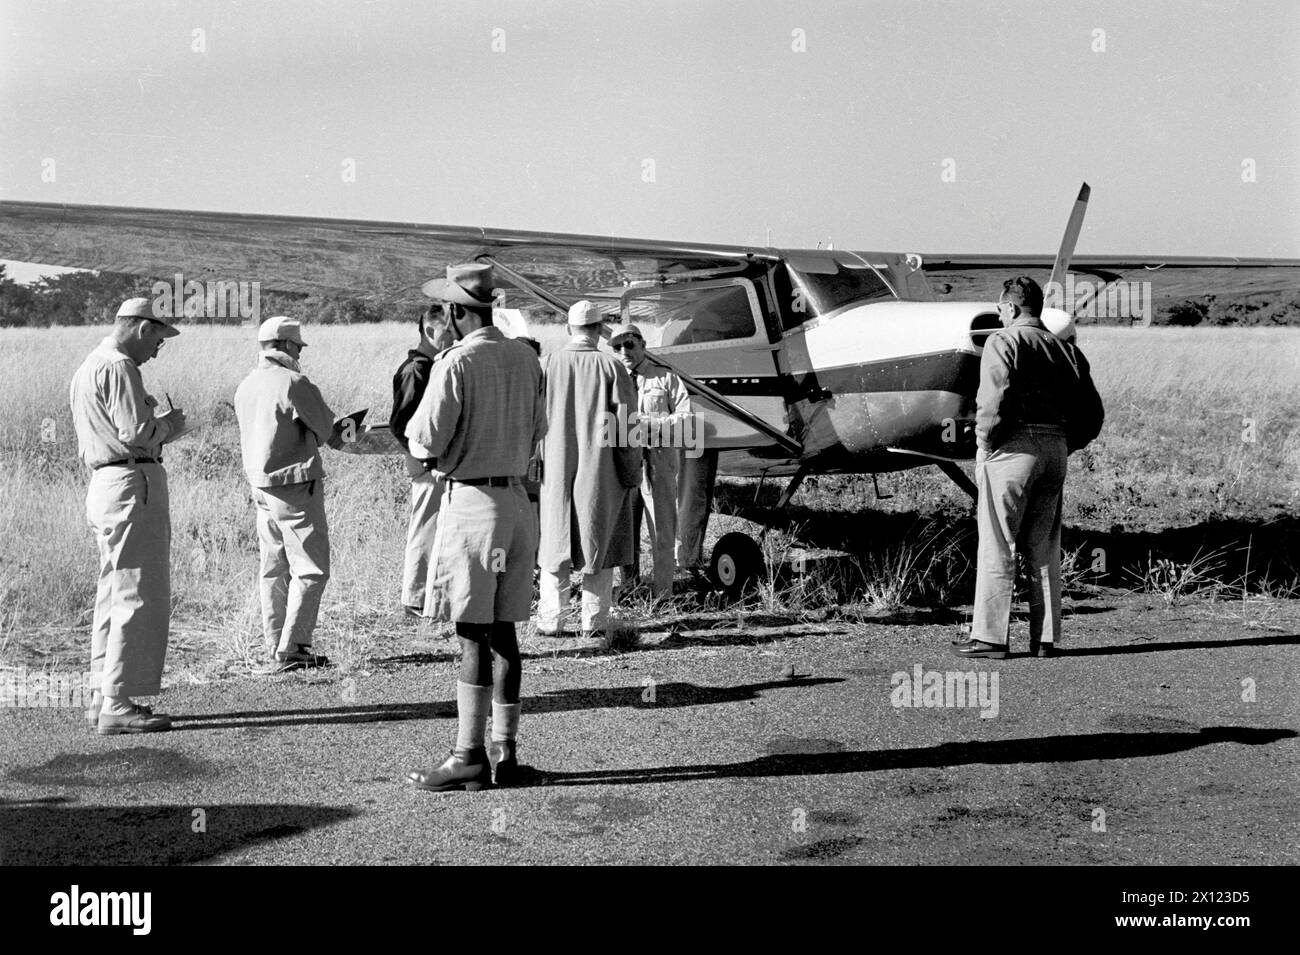 Passengers Prepare to Embark on Cessna 170 Light Airplane, Plane or Aircraft (produced from 1948-1956) at the Airfield or Airport of Fort Dauphin Madagascar. Vintage or Historic Monochrome or Black and White Image c1960. Stock Photo